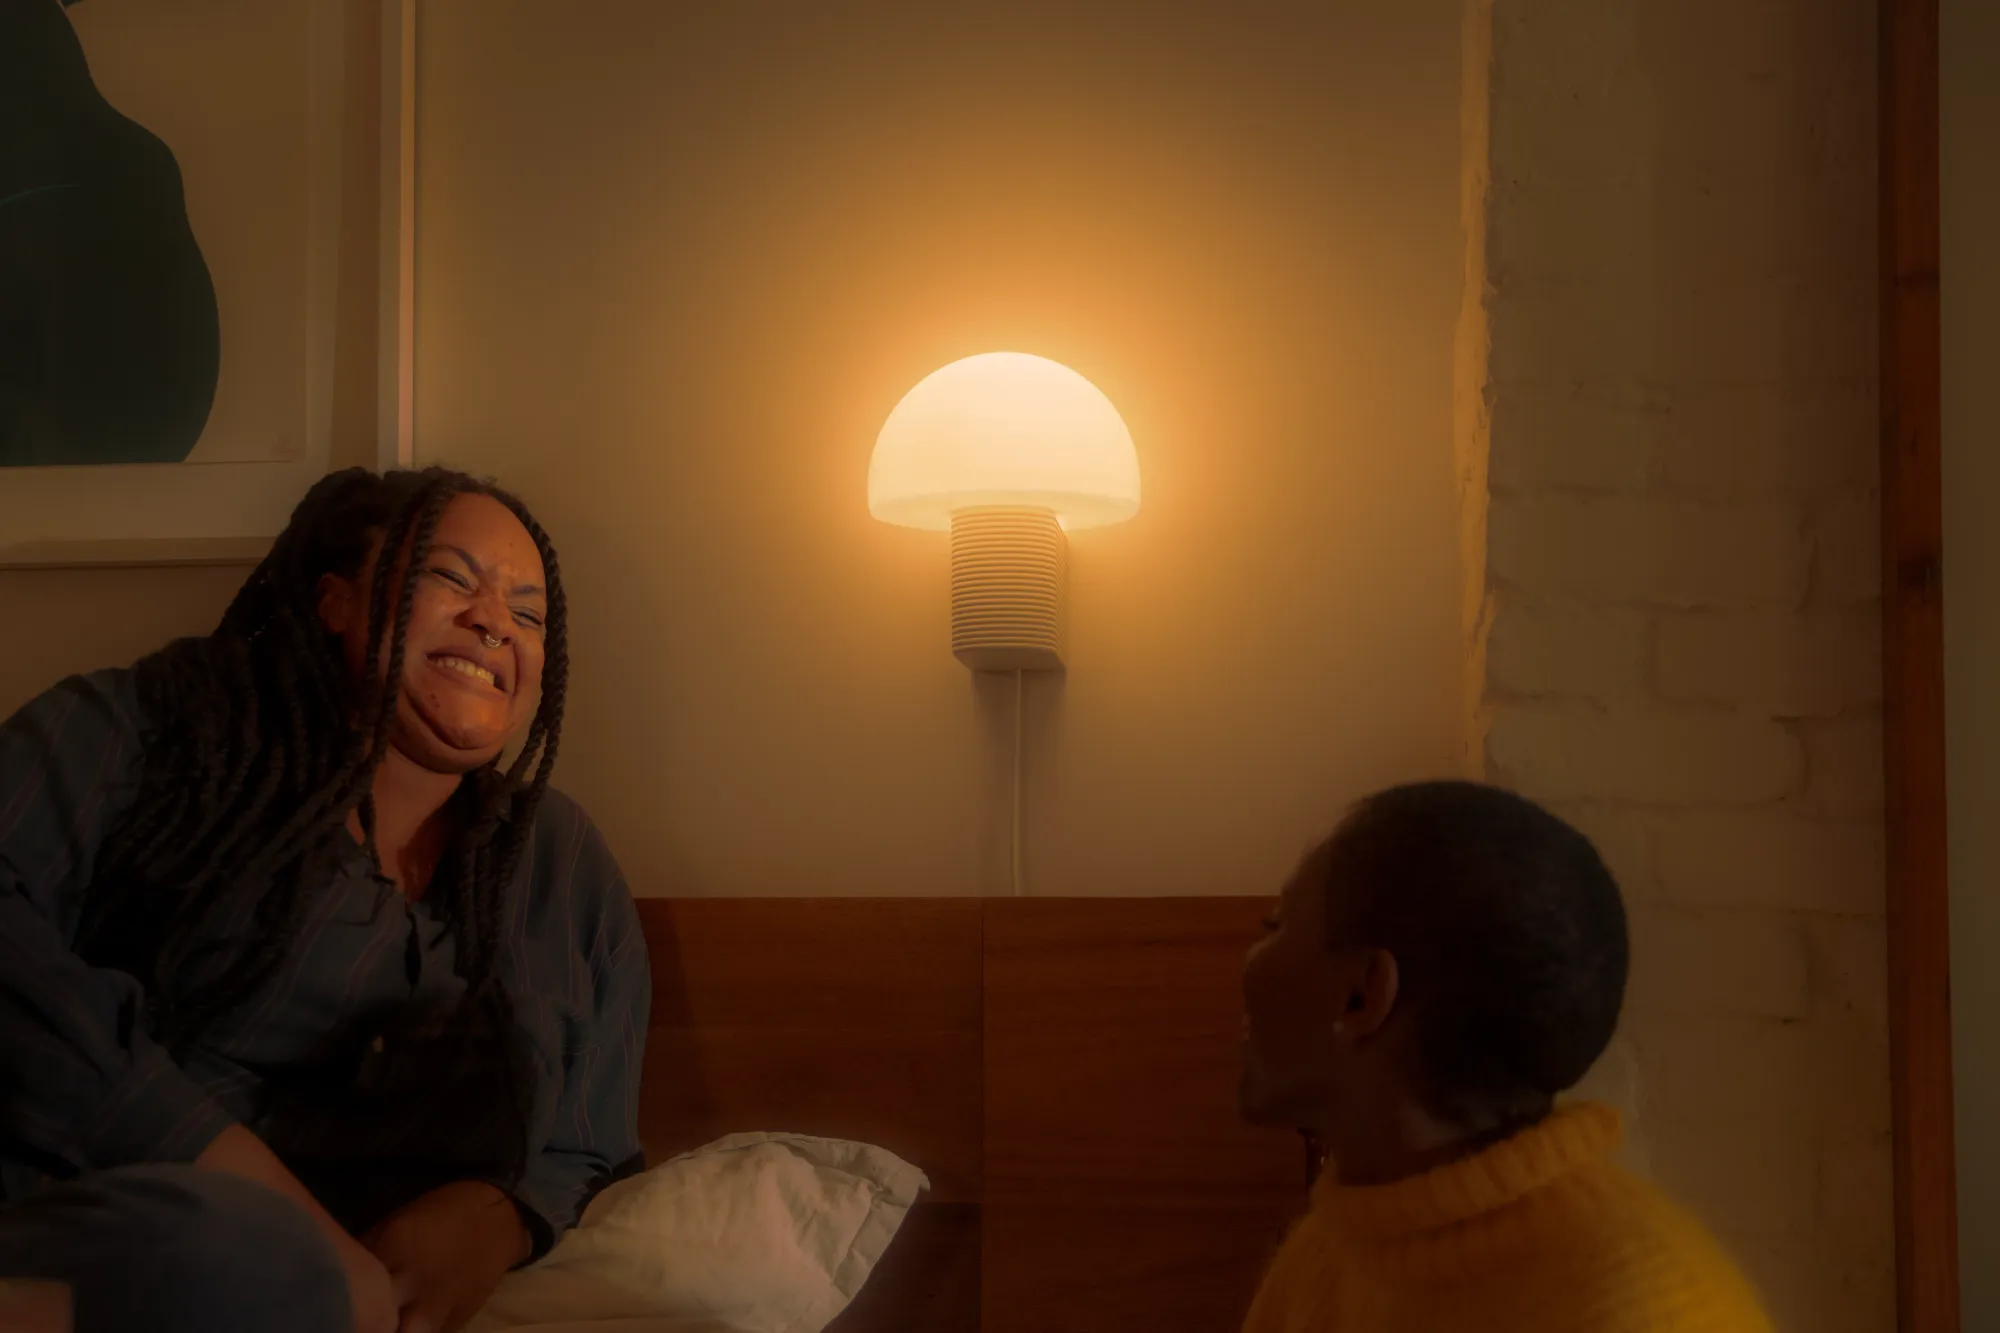 Two women are laughing together while hanging out. Their profiles are illuminated by light coming from a Gantri Arintzea Wall Light emitting warm light. 